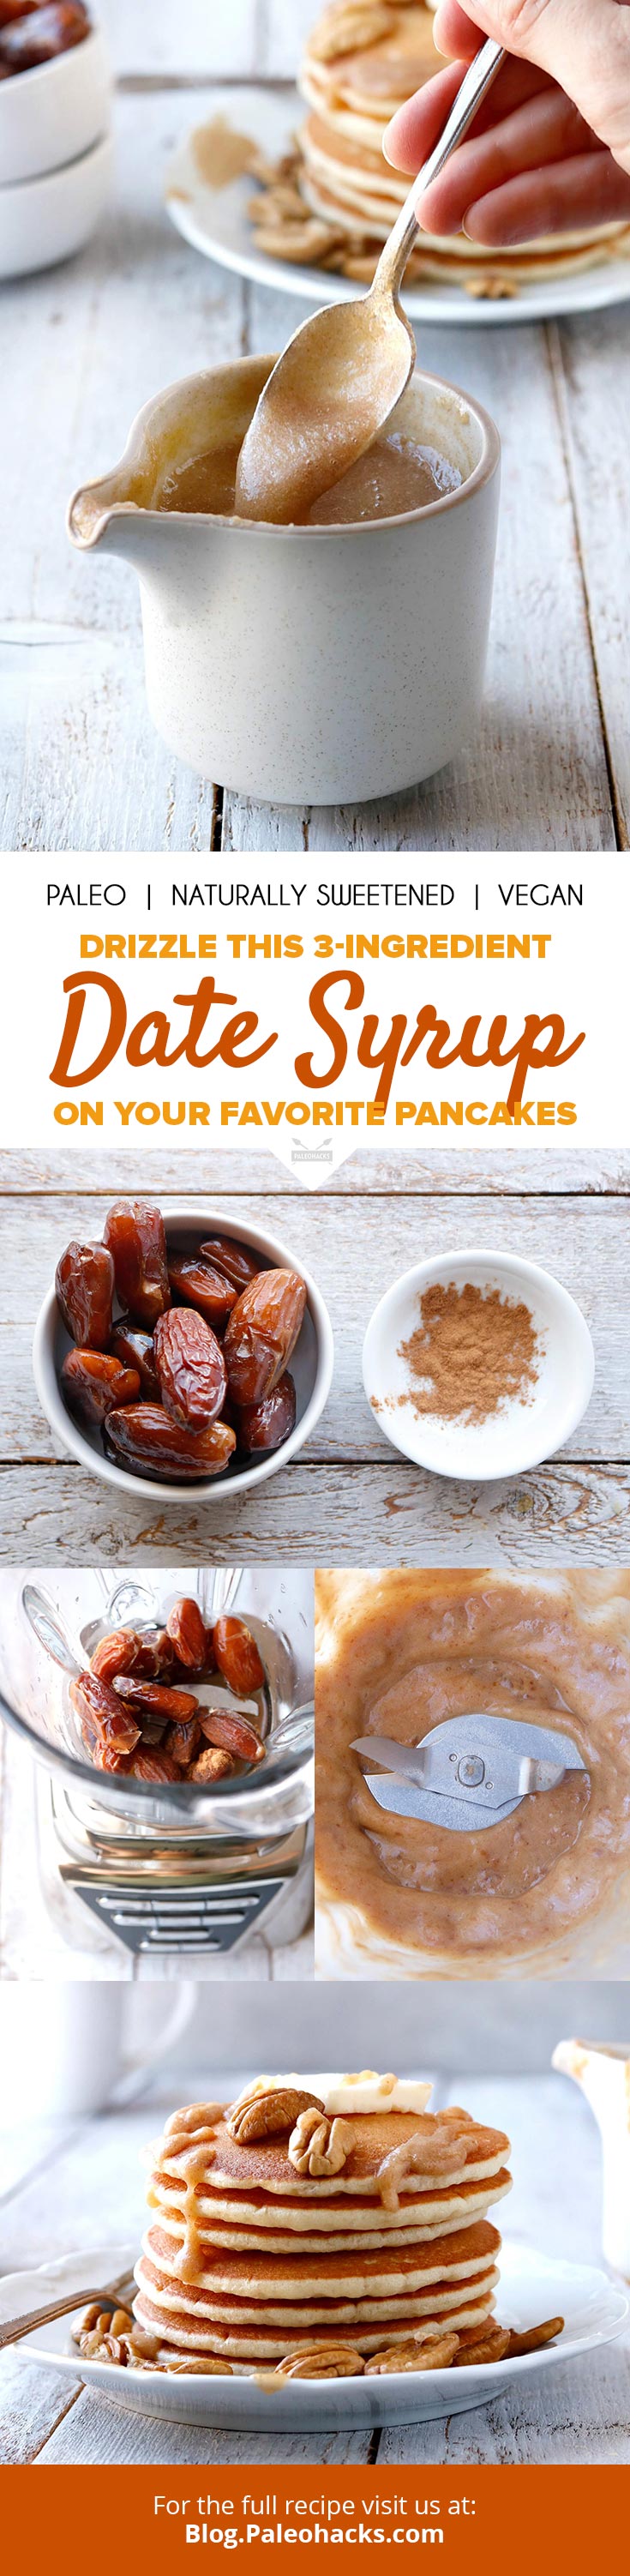 Want to make your own sweet pancake drizzler with just three healthy, vegan and Paleo ingredients? This easy recipe for date syrup will do the trick.